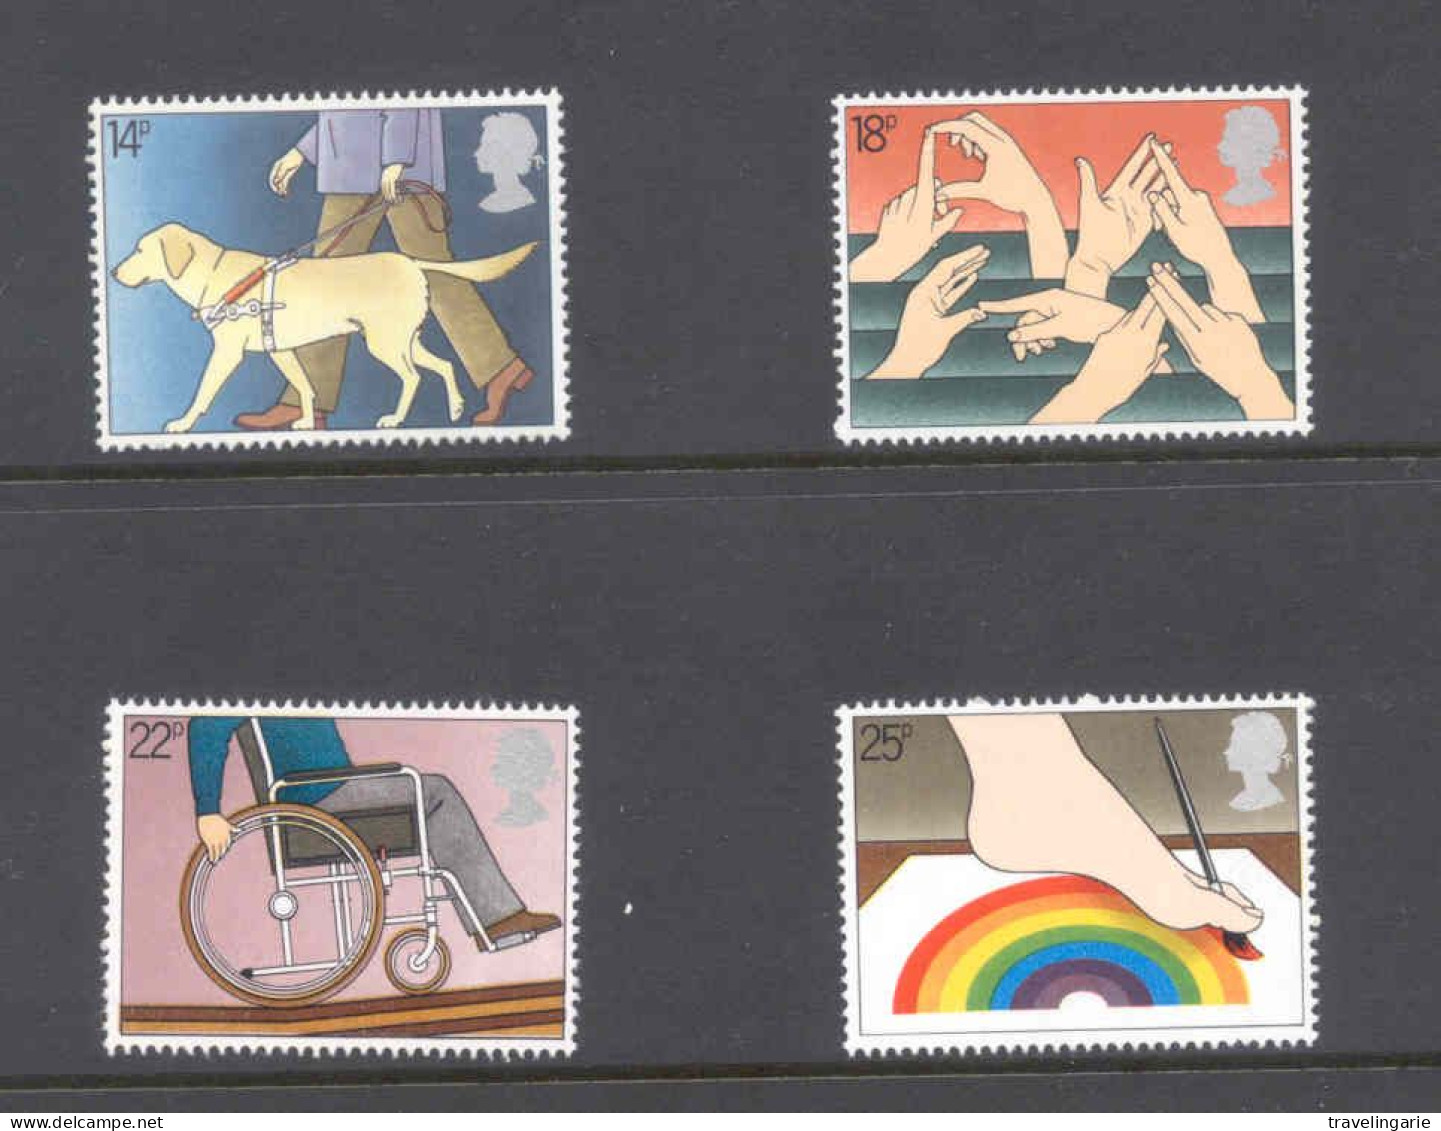 Great-Britain 1981 International Year Of The Disabled With Guide Dog MNH ** - Hunde